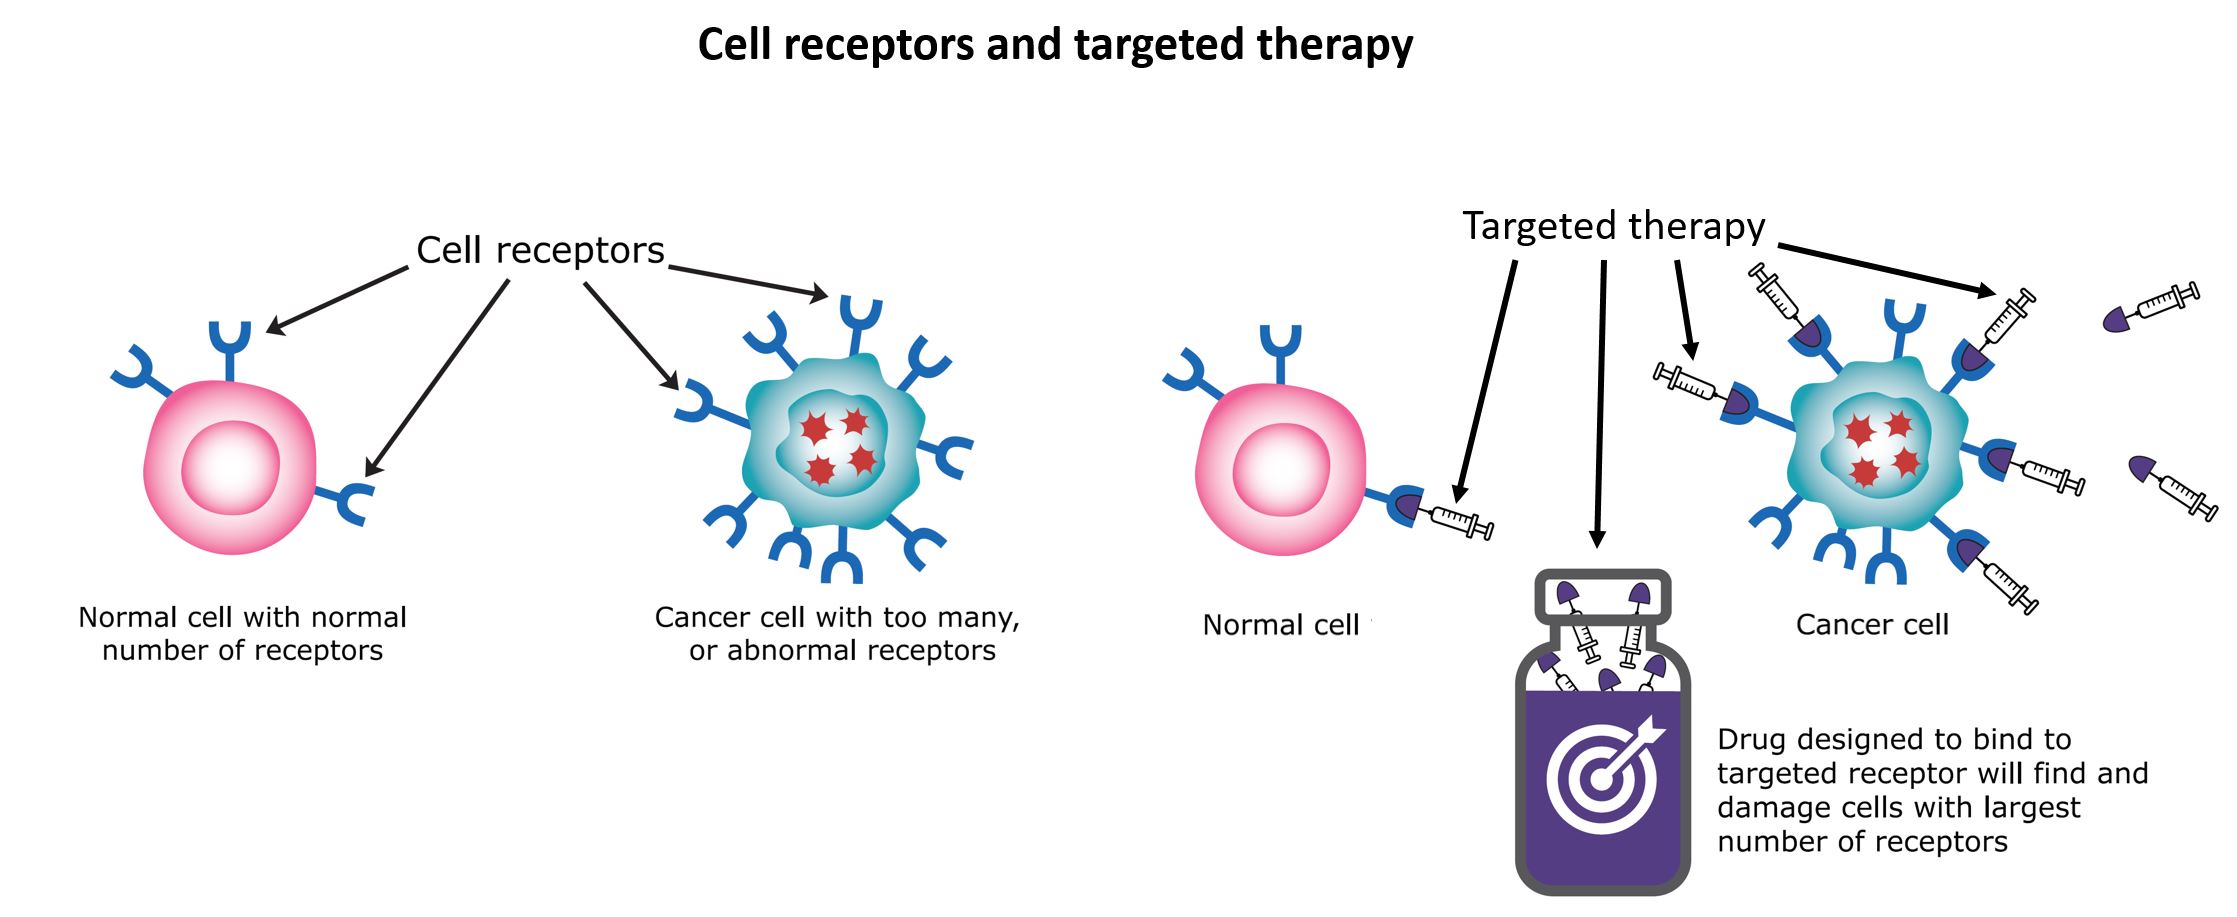 Image of how <button
                x-data
                class='glossary-tip tt-targeted-therapy'
                x-tooltip='<p>Targeted therapy refers to medications that stop&nbsp;the growth of cancer&nbsp;by blocking certain pathways that tumors need to grow.&nbsp;Targeted therapies are designed to cause&nbsp;fewer side effects than chemotherapy because they&nbsp;only affect&nbsp;cancer cells. Chemotherapy&nbsp;attacks&nbsp;all rapidly dividing cells—including normal cells&nbsp;and cancer cells—leading&nbsp;to additional&nbsp;side effects.&nbsp;</p>
'
            >targeted therapy</button> works